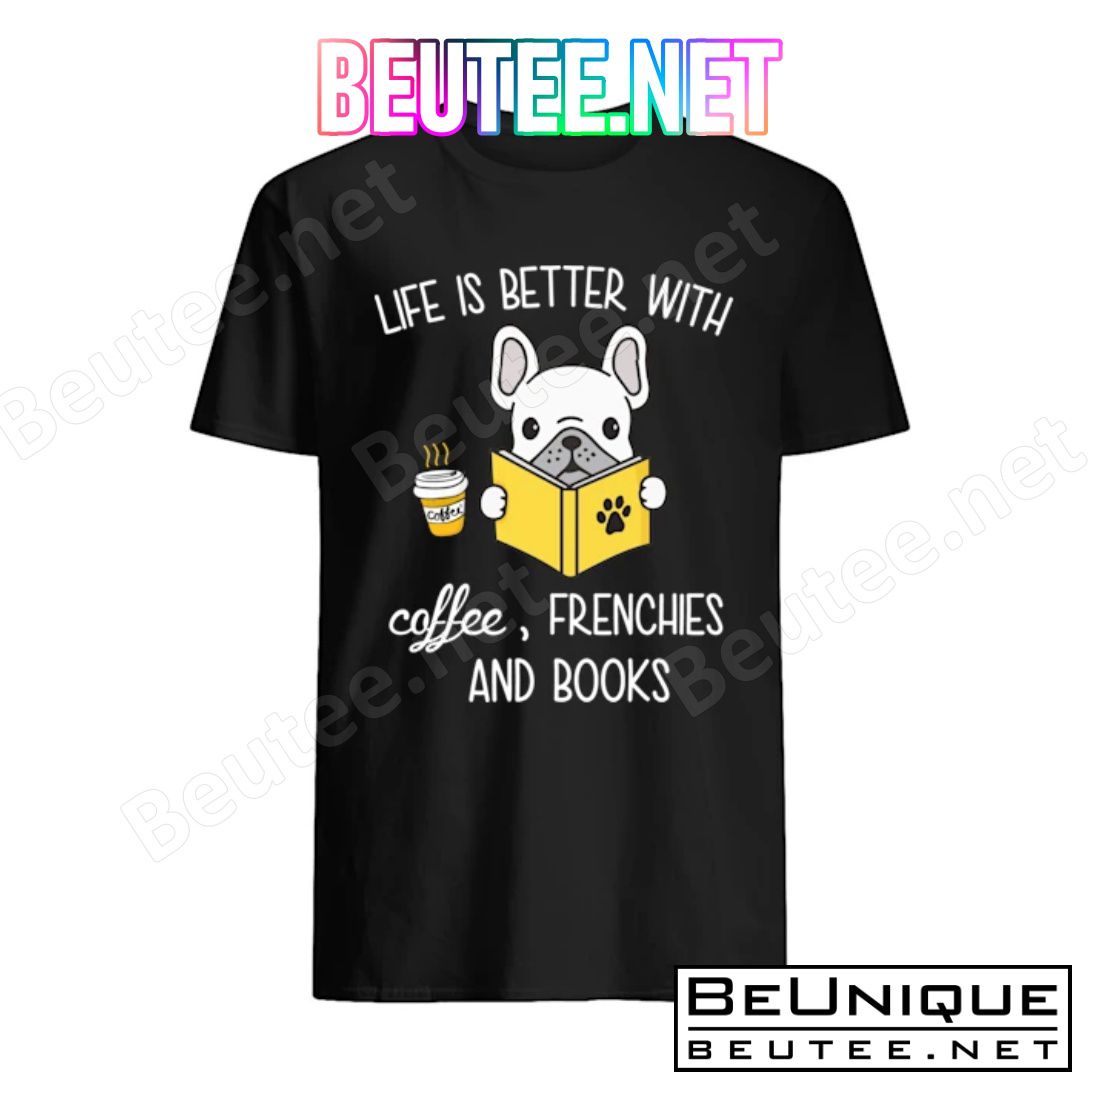 Life Is Better With Coffee Frenchies And Books Shirt